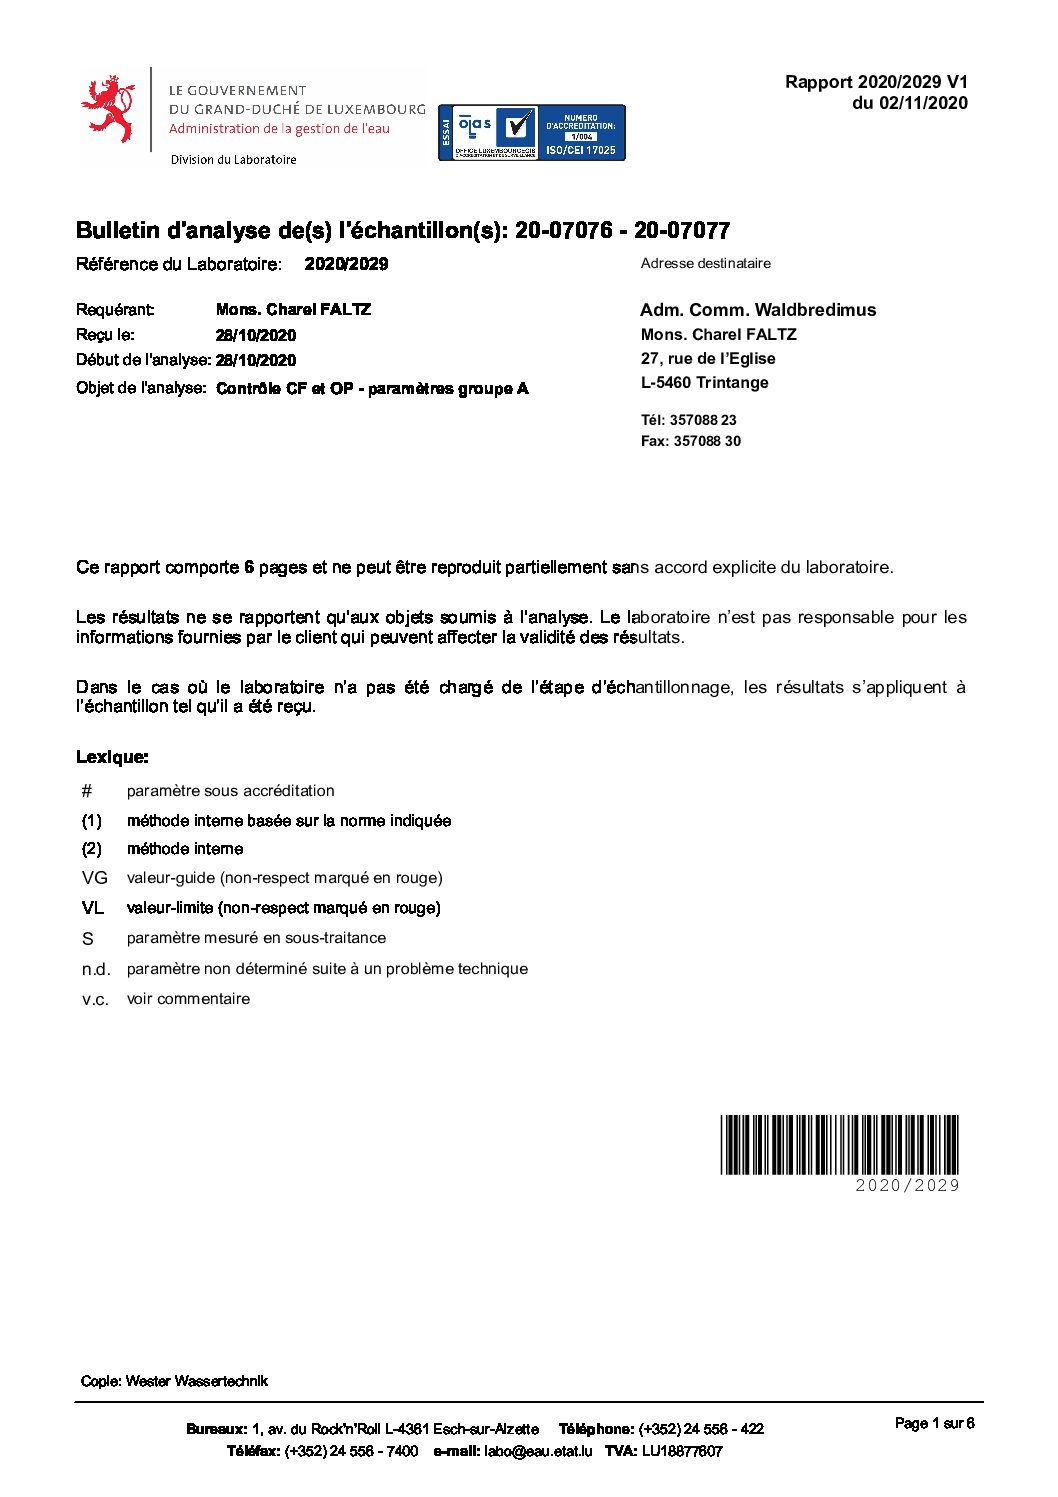 Rapport AGE 02.11.2020-1